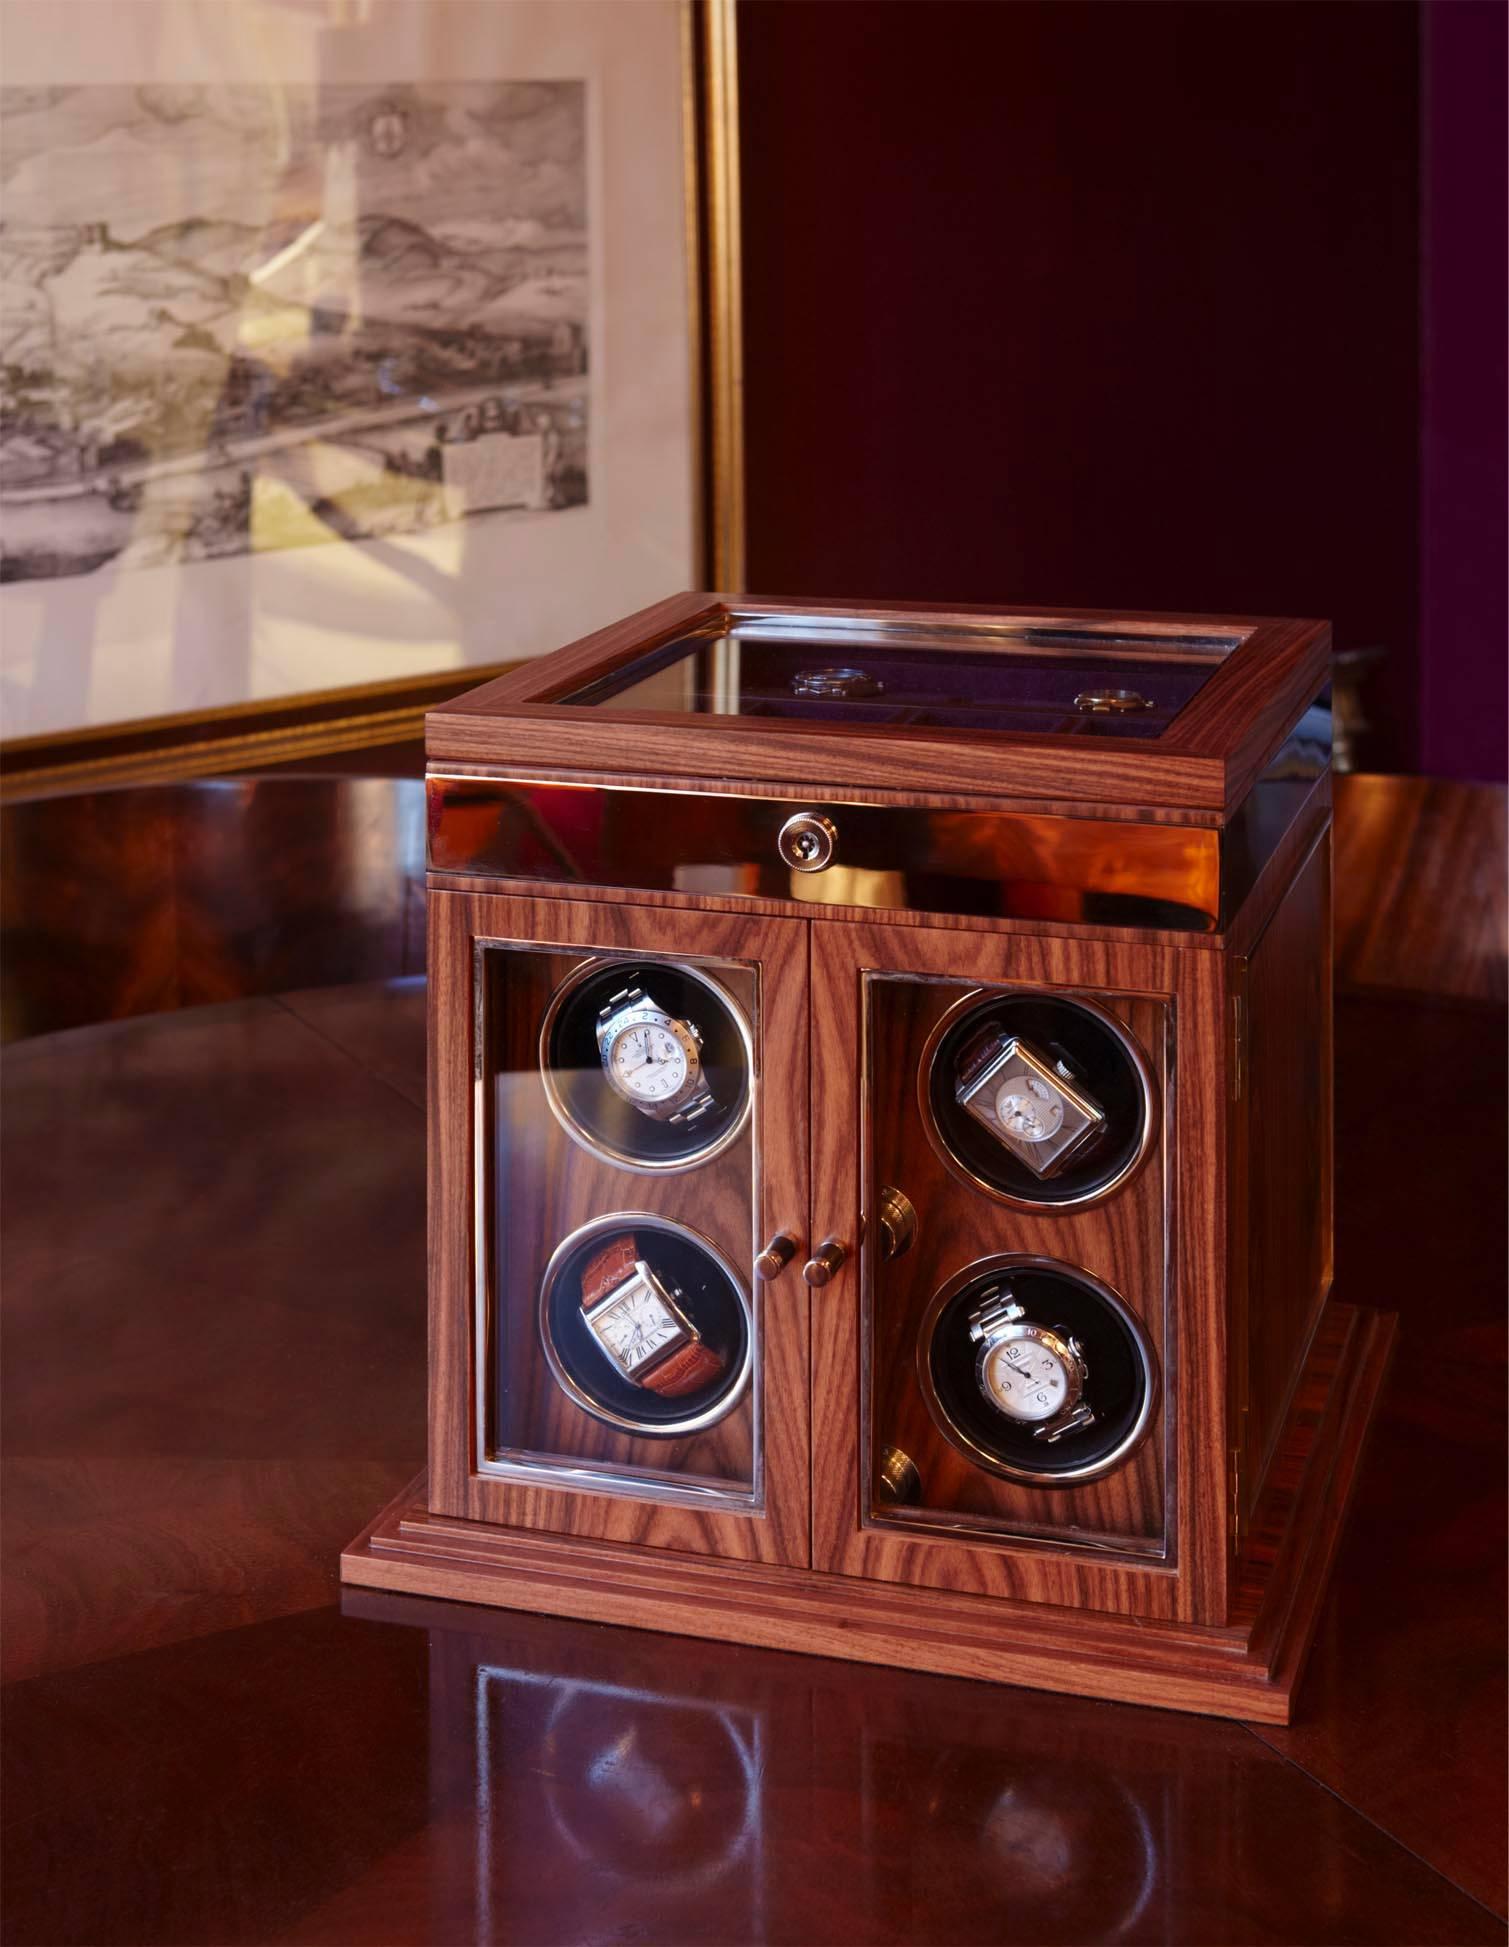 Made of Santos rosewood with inlays and frame working in nickel. The watch box has four multi-directional self-winding rotator cuffs inside. The box has a lift up lid with space for cufflinks and tiepins. The piece locks using the finest lock,